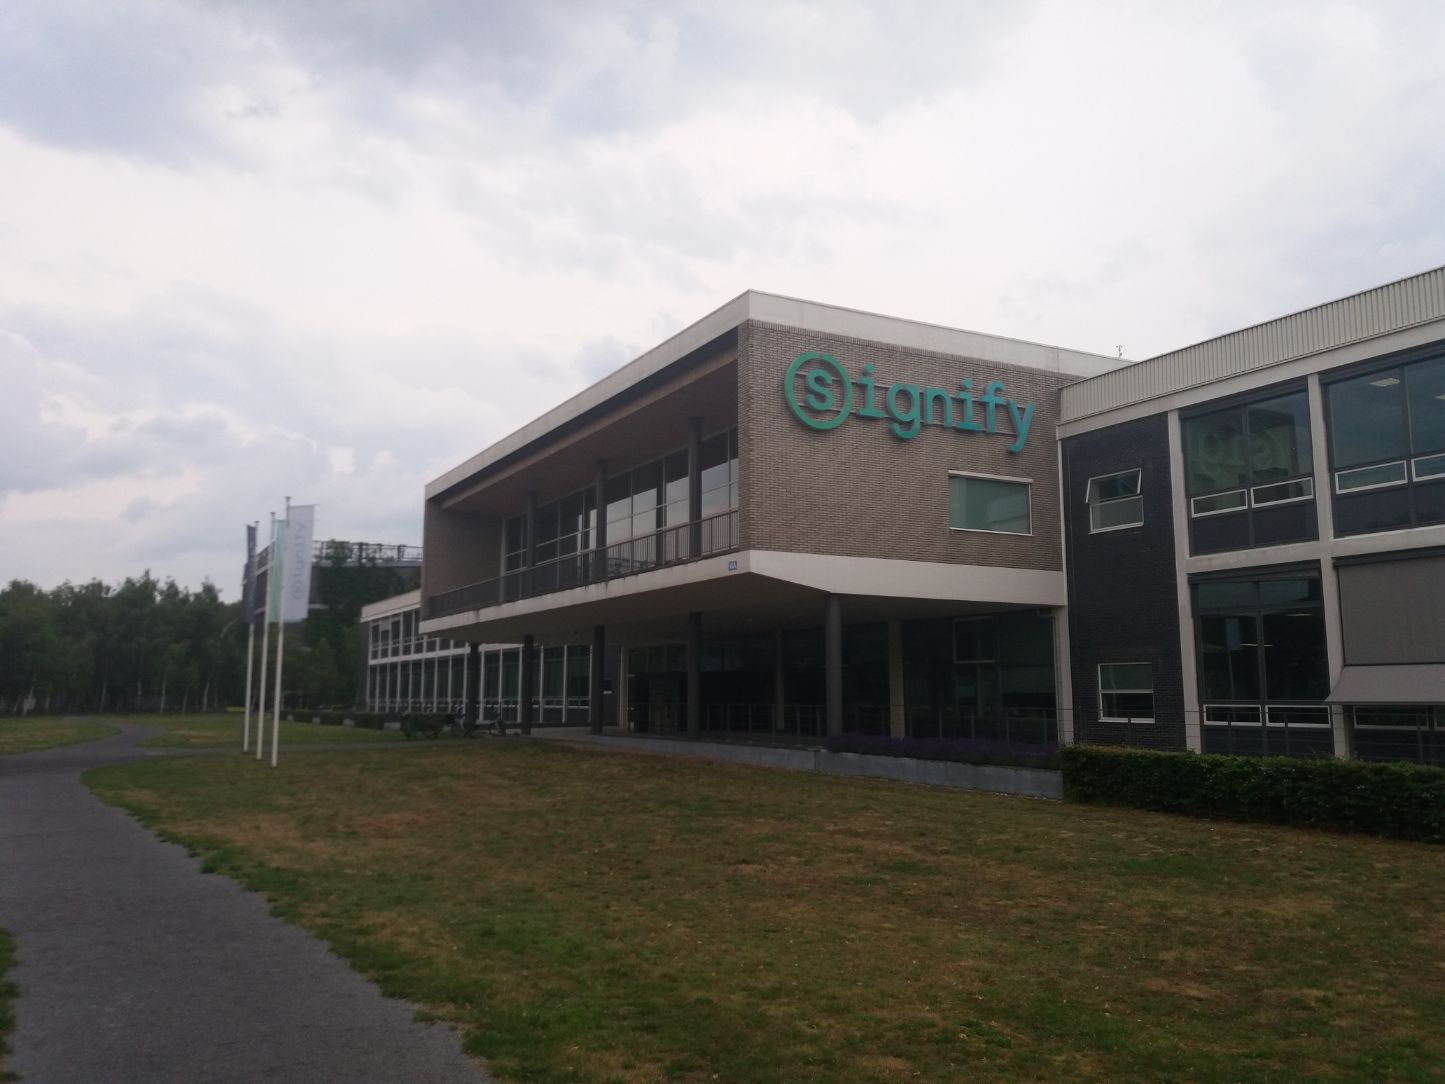 Signify-High Tech Campus kantoor Eindhoven 